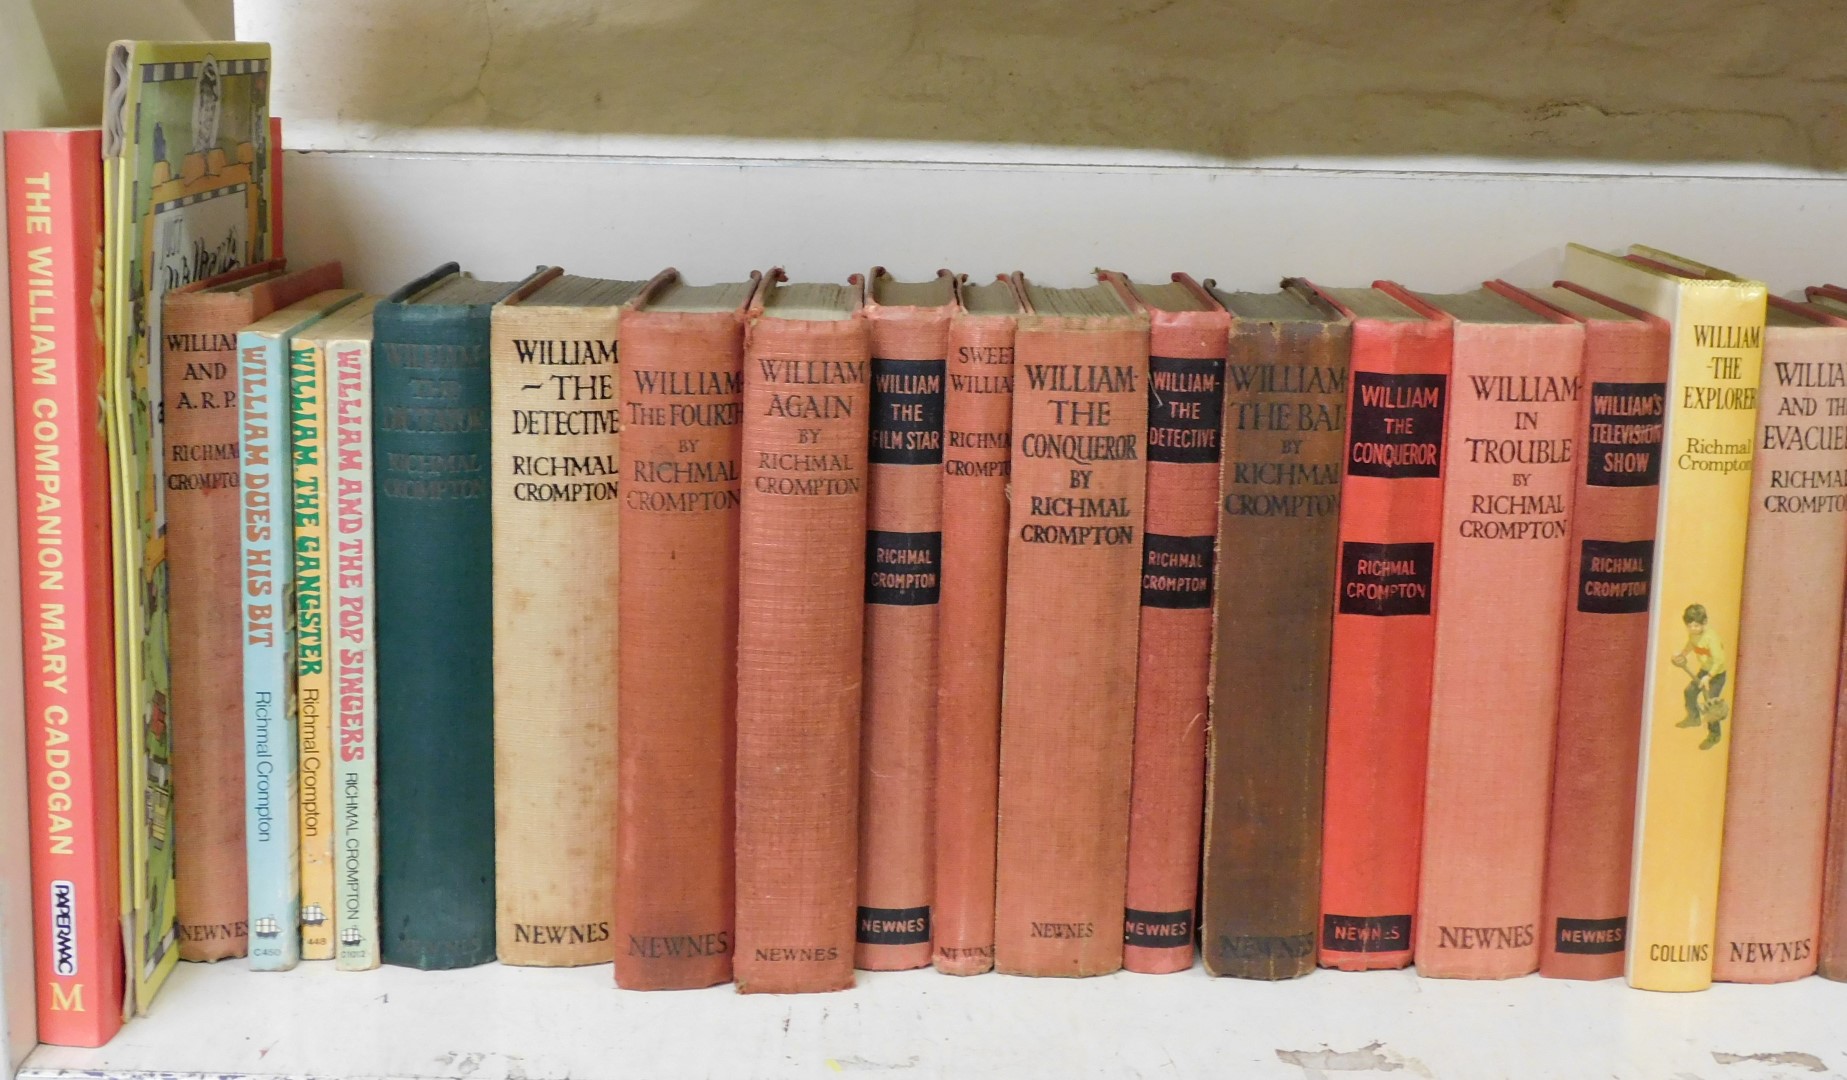 Books. Crompton (Richmal), Just William stories, various volumes, published by Newnes, a few with du - Image 3 of 5